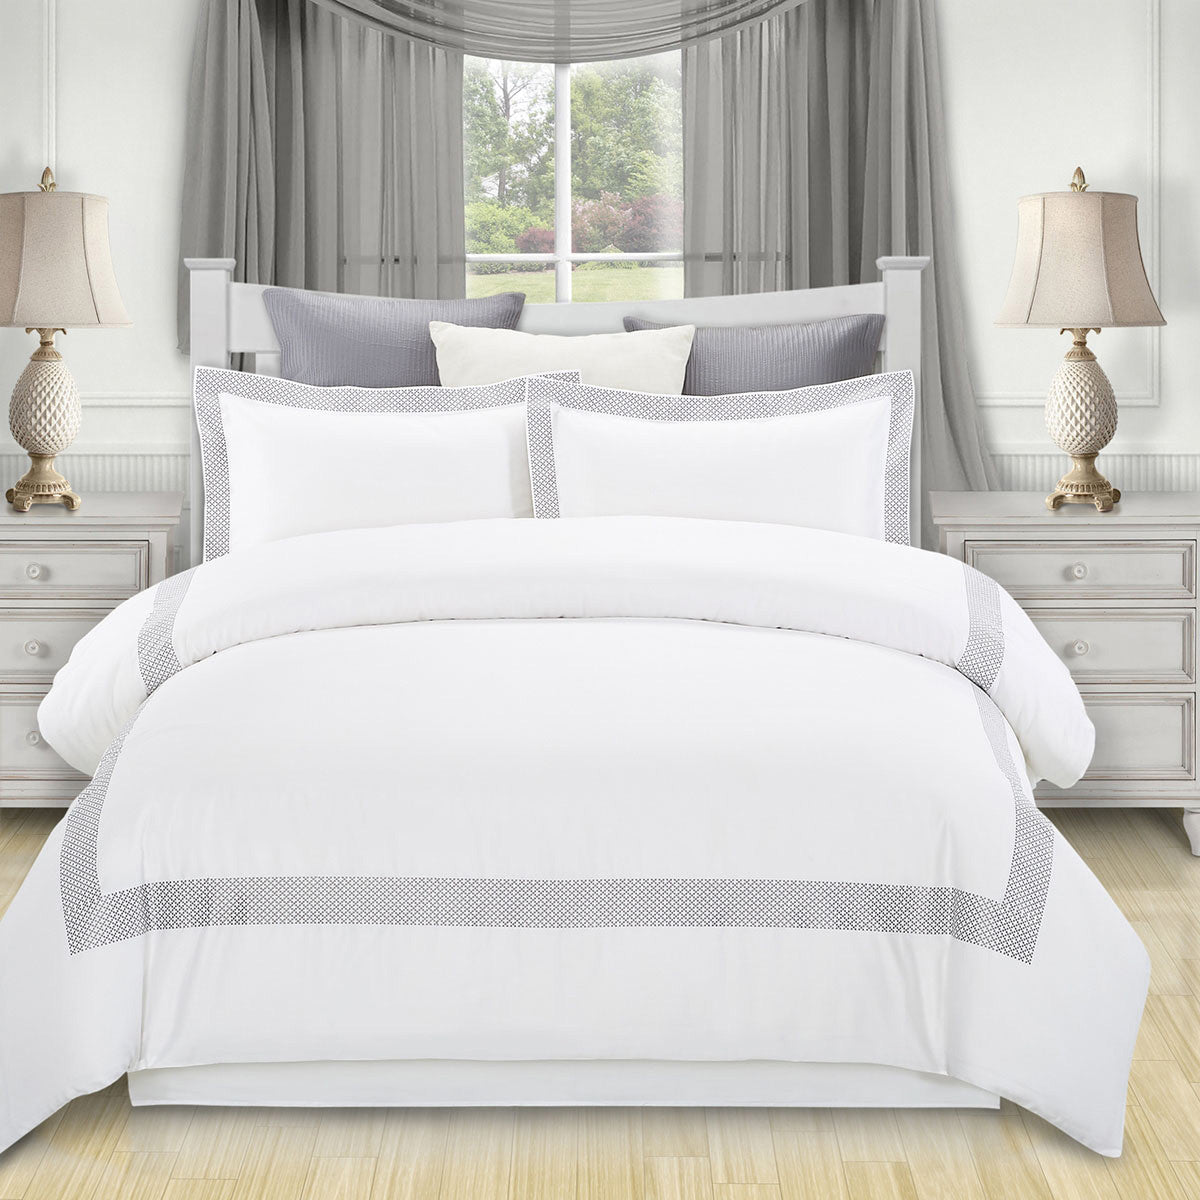 Gray and White Queen 100% Cotton 200 Thread Count Washable Duvet Cover Set